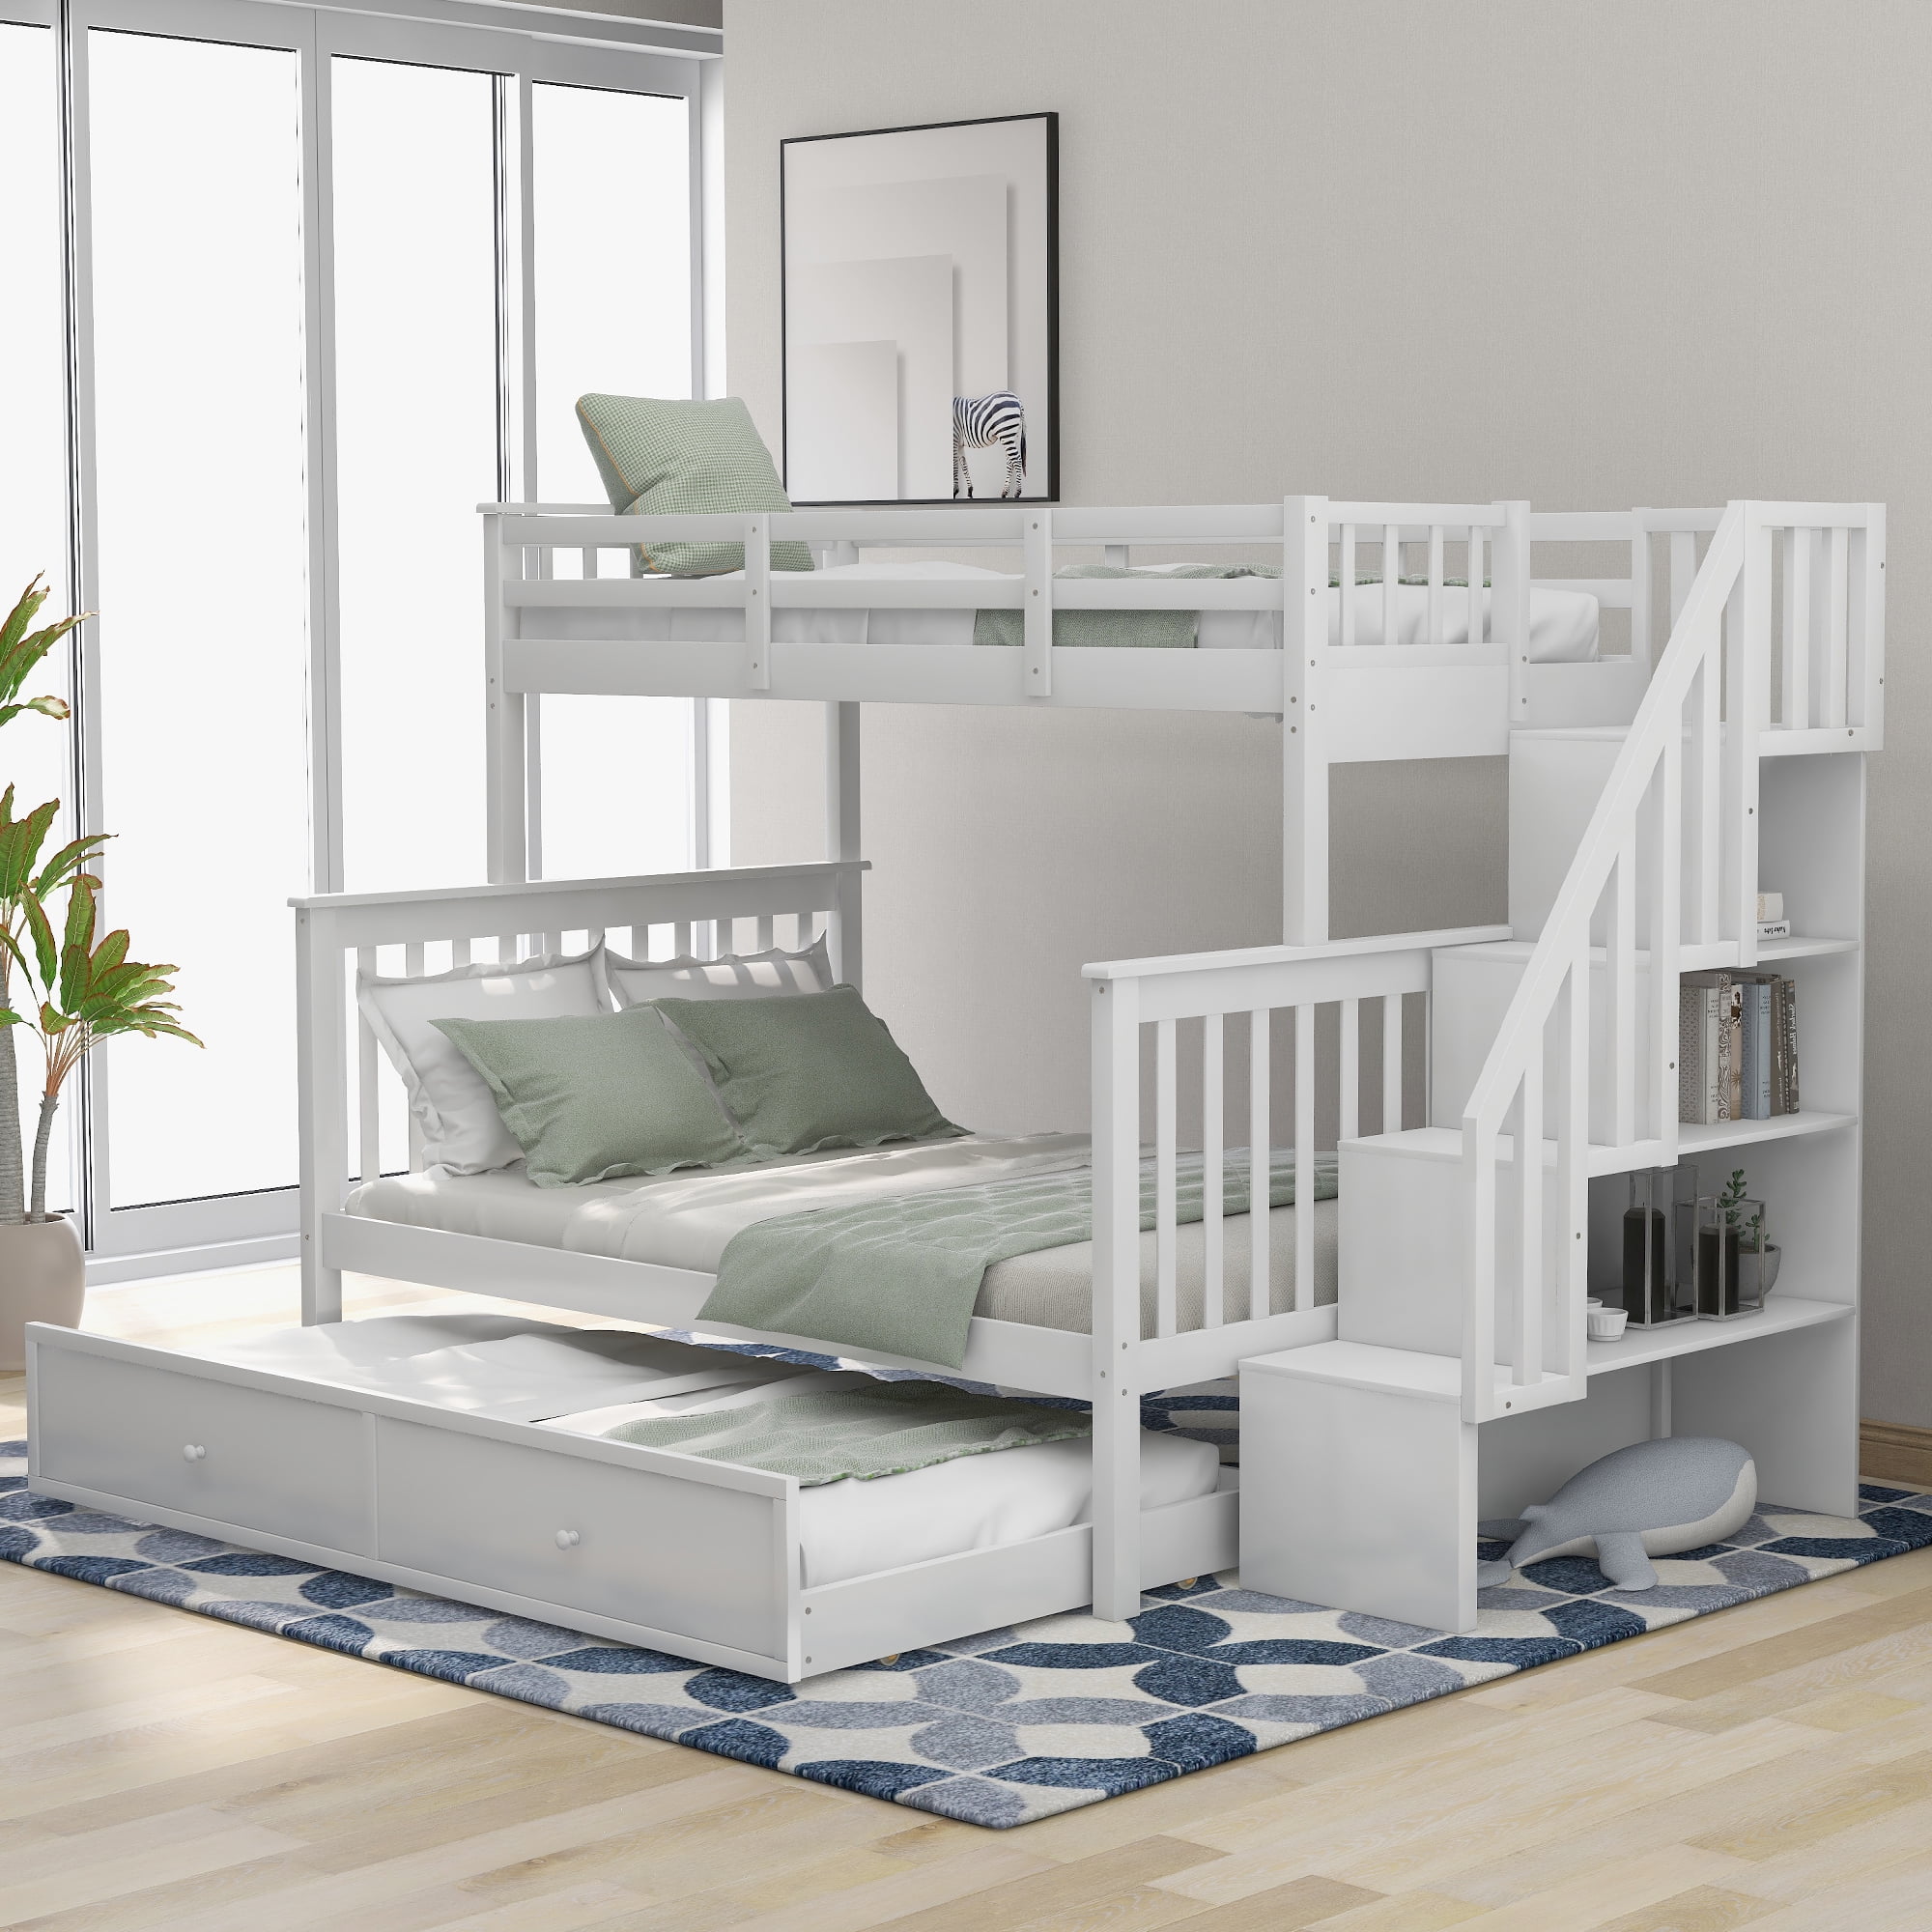 Full Bunk Bed With Twin Size Trundle, Twin Over Full Bunk Bed With Trundle